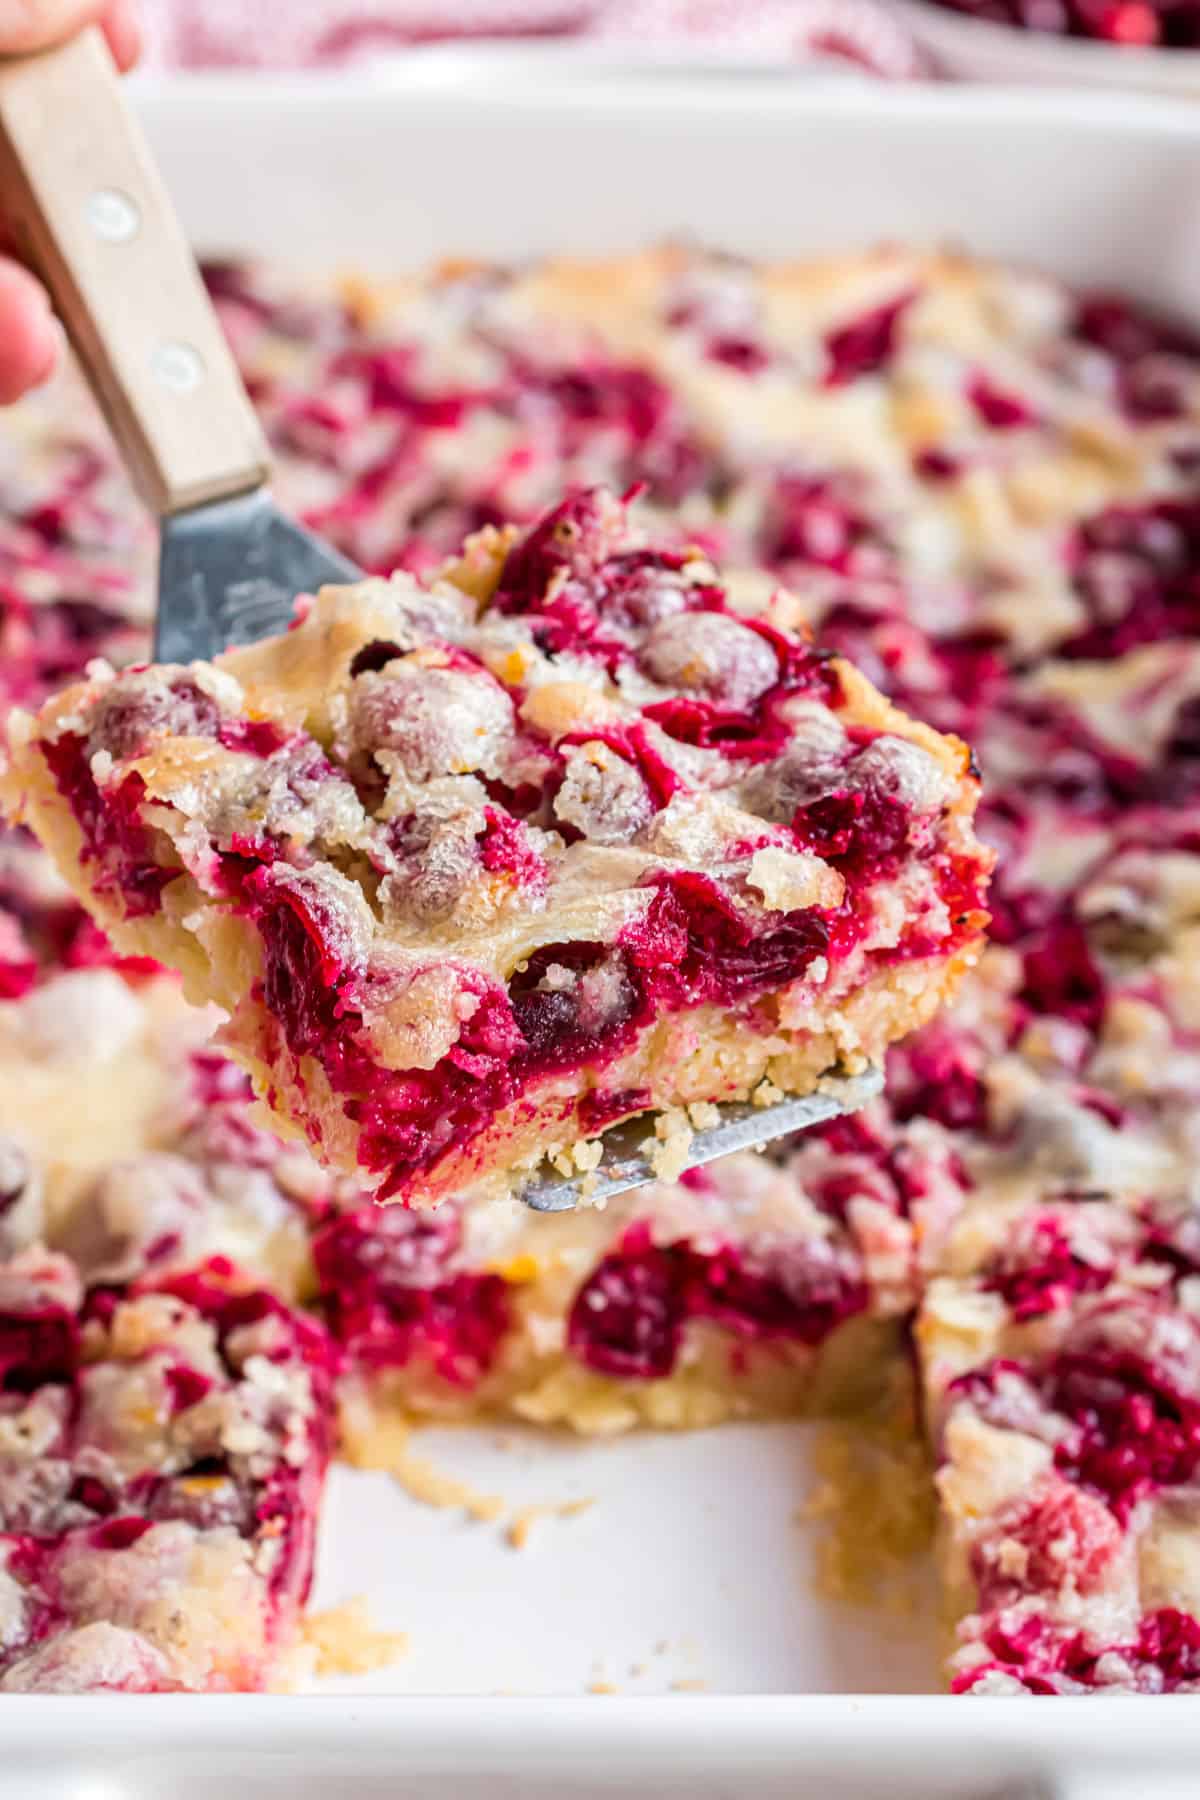 Cranberry cake served with a spatula.